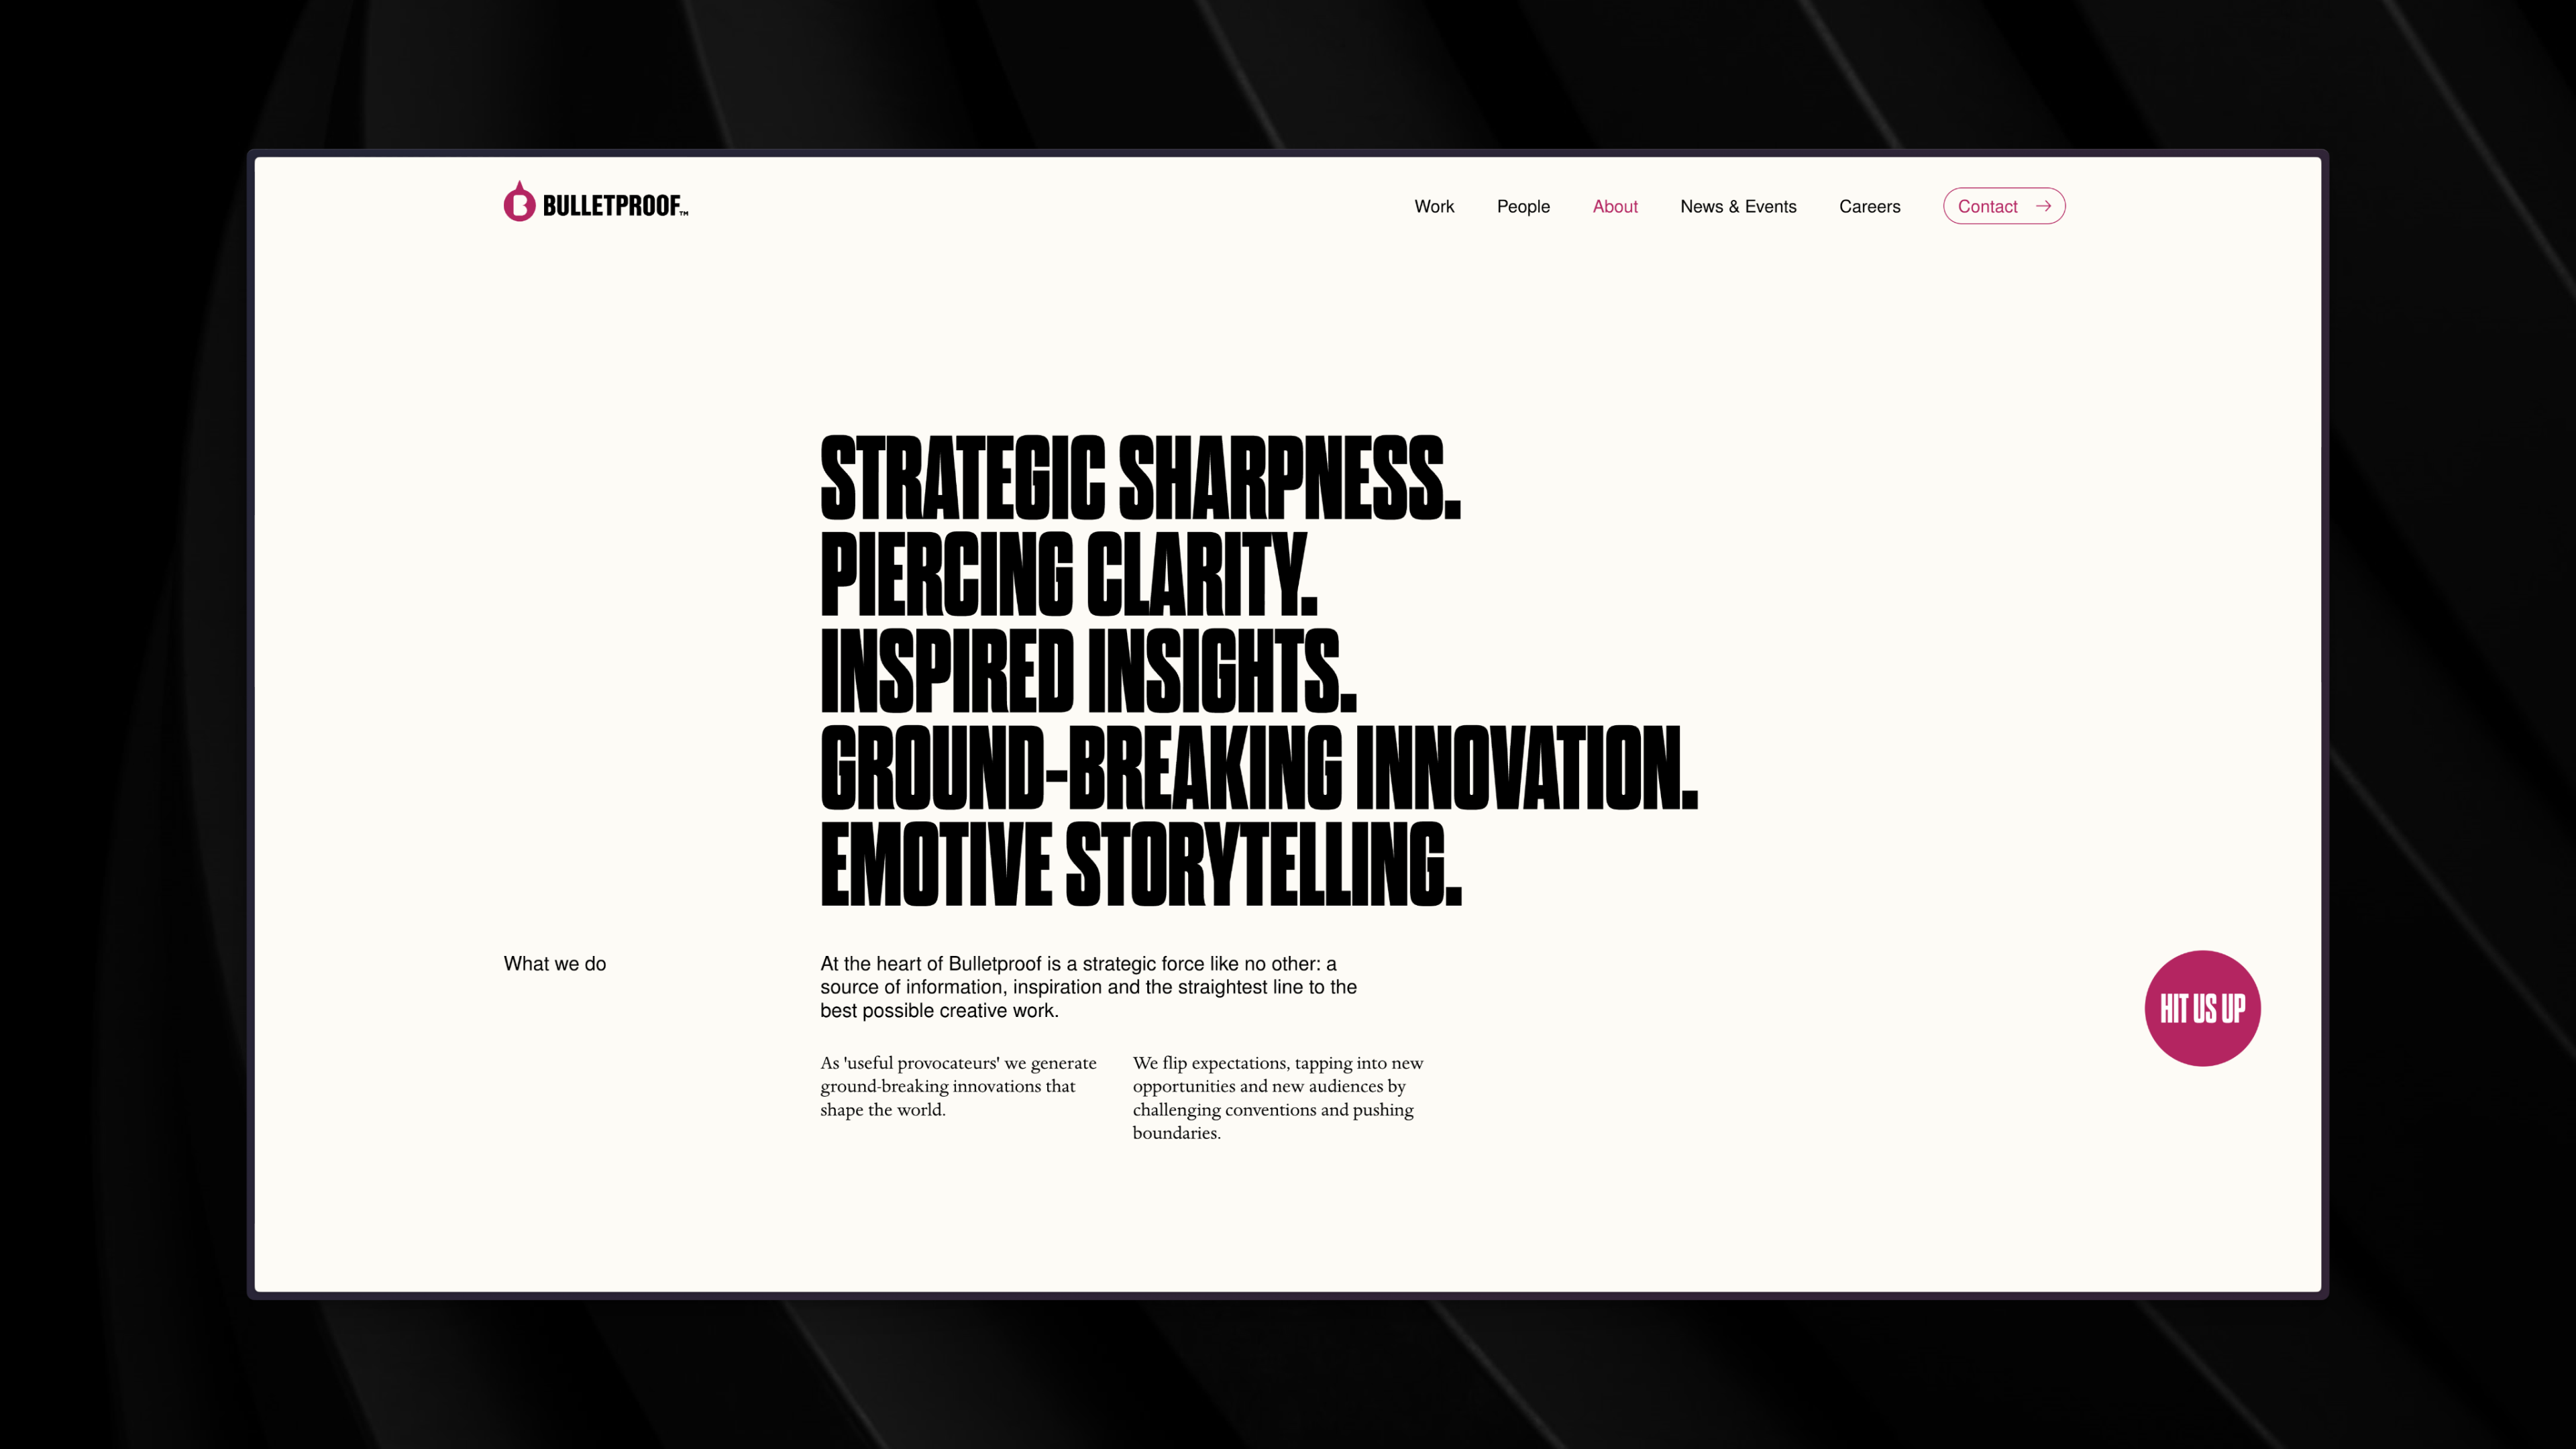 About page of Bulletproof displaying bold text sentences in vertical design 